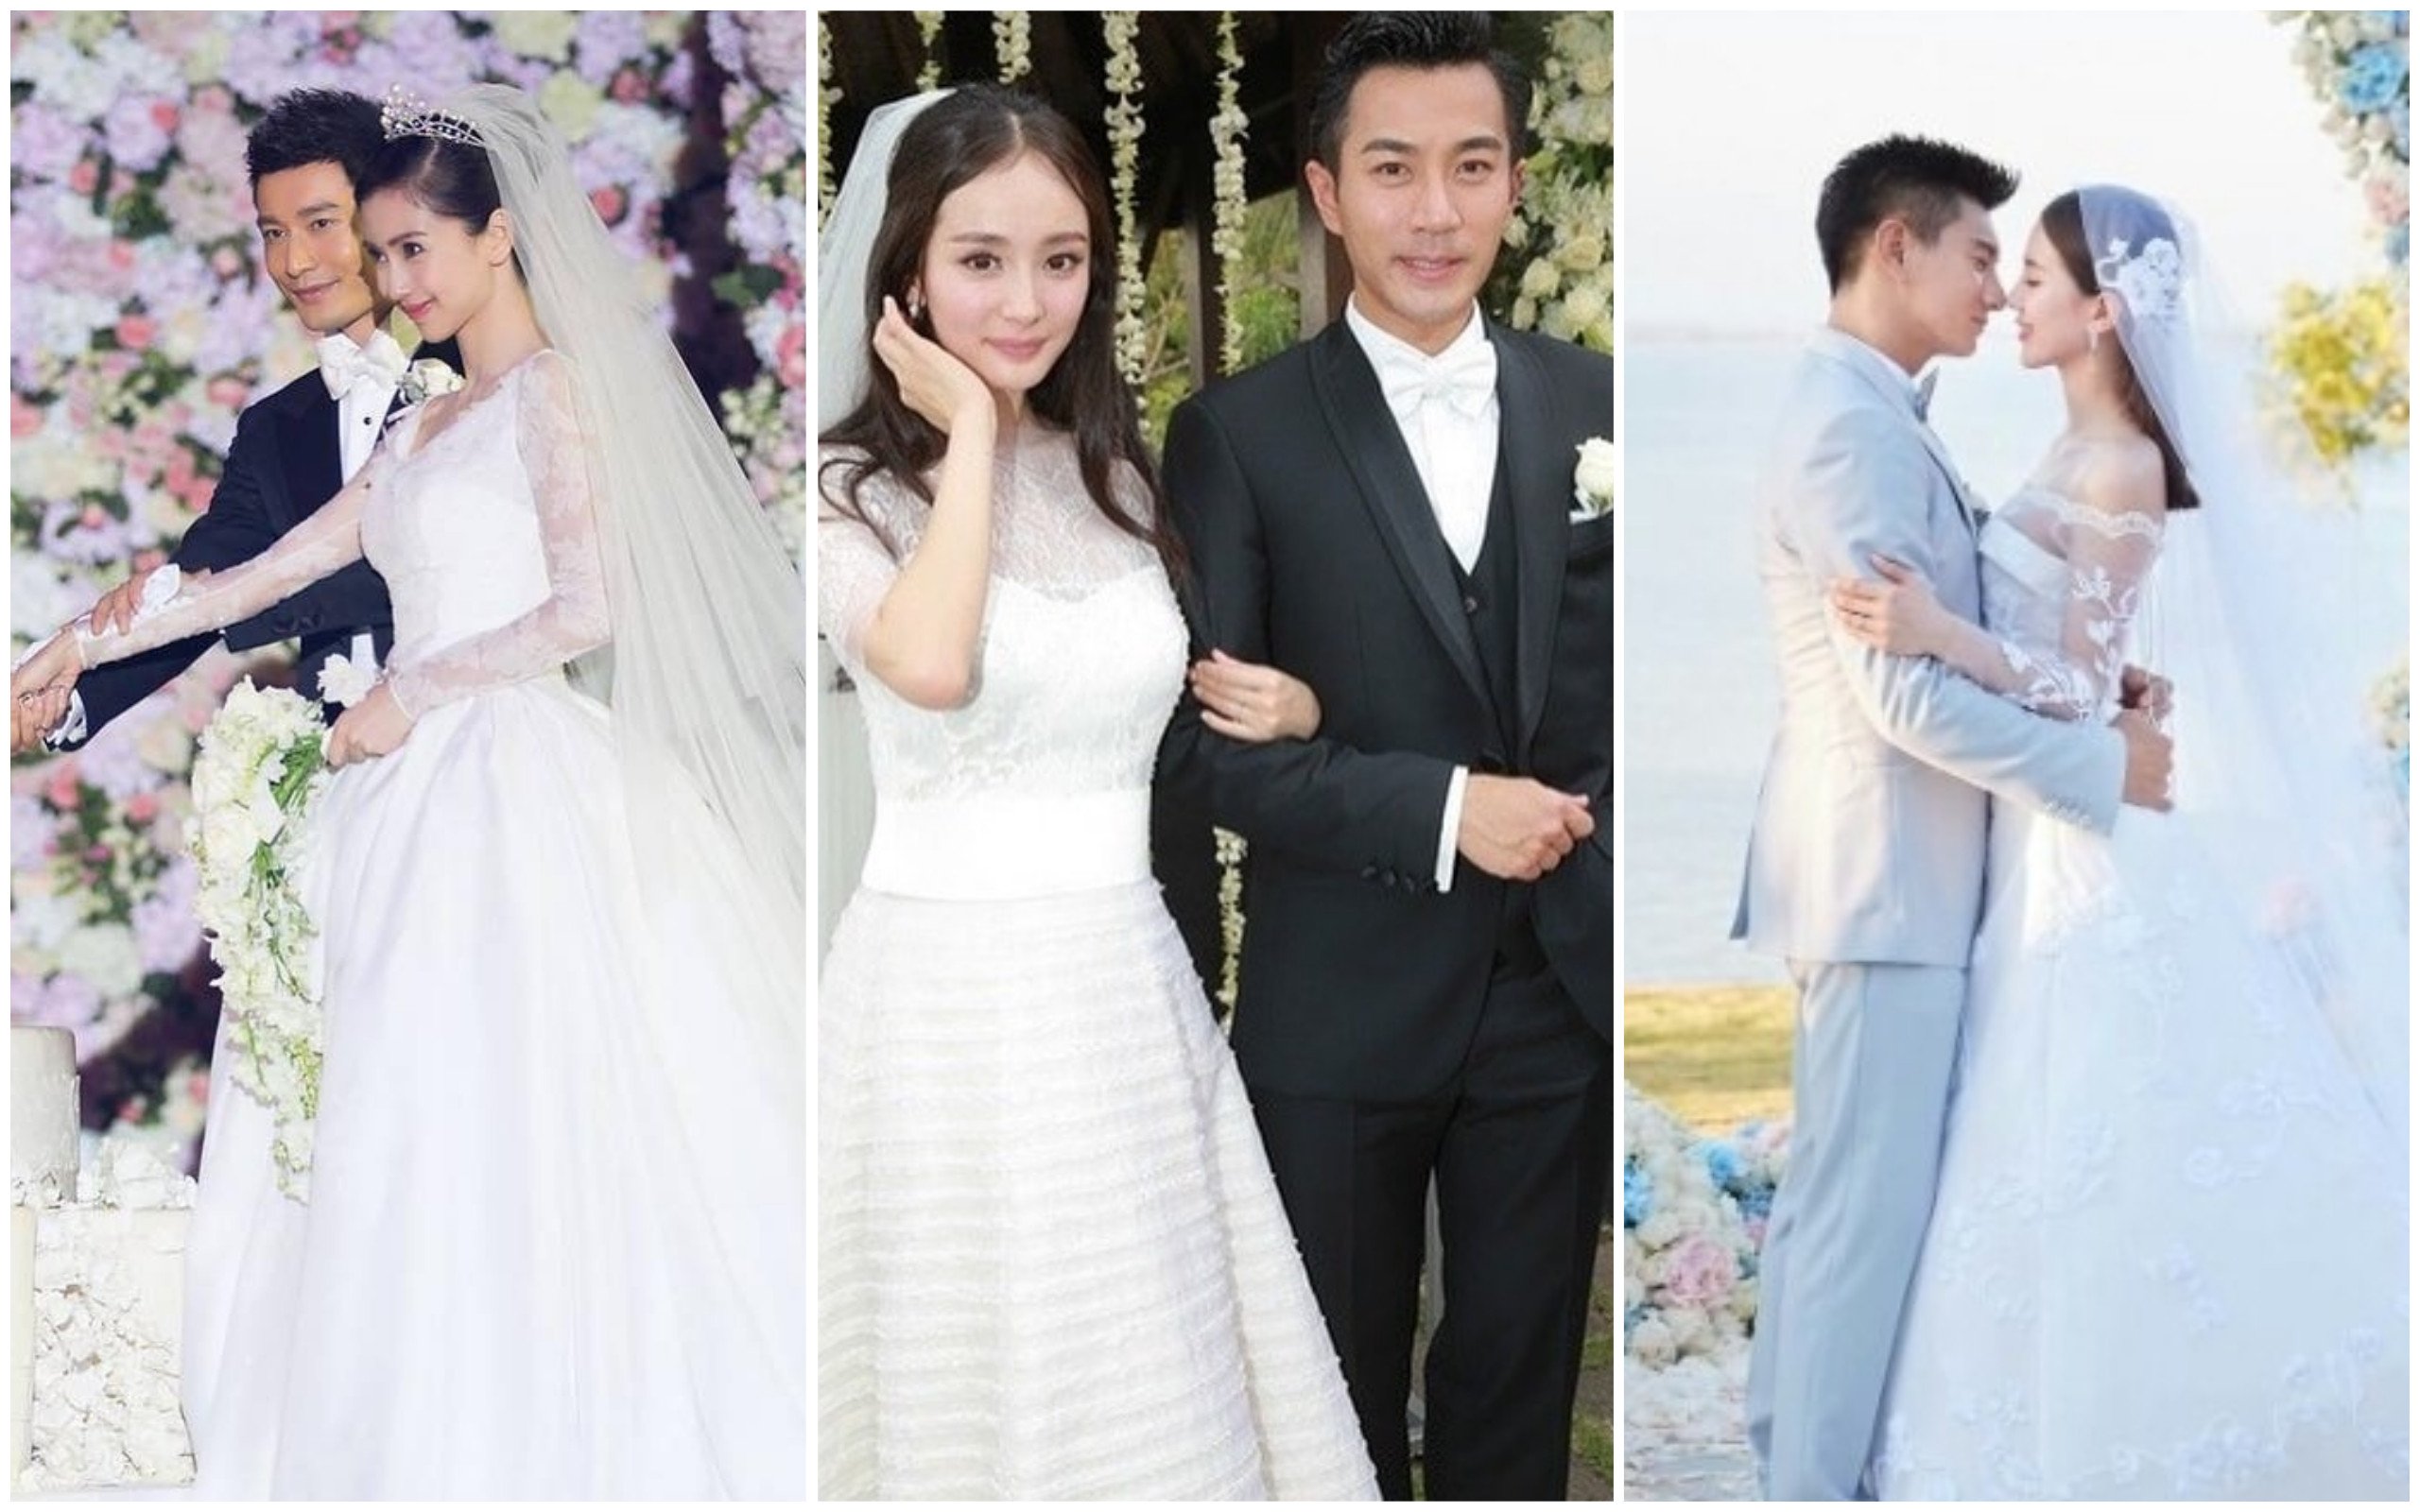 From left, the weddings of Angelababy and Huang Xiaoming, Yang Mi and Liu Kaiwei, and Wu Qilong and Liu Shishi were three of the most lavish of recent years. Photo: @thebridestory, @hawicklauandyangmi, @asiaweddingnetwork/Instagram